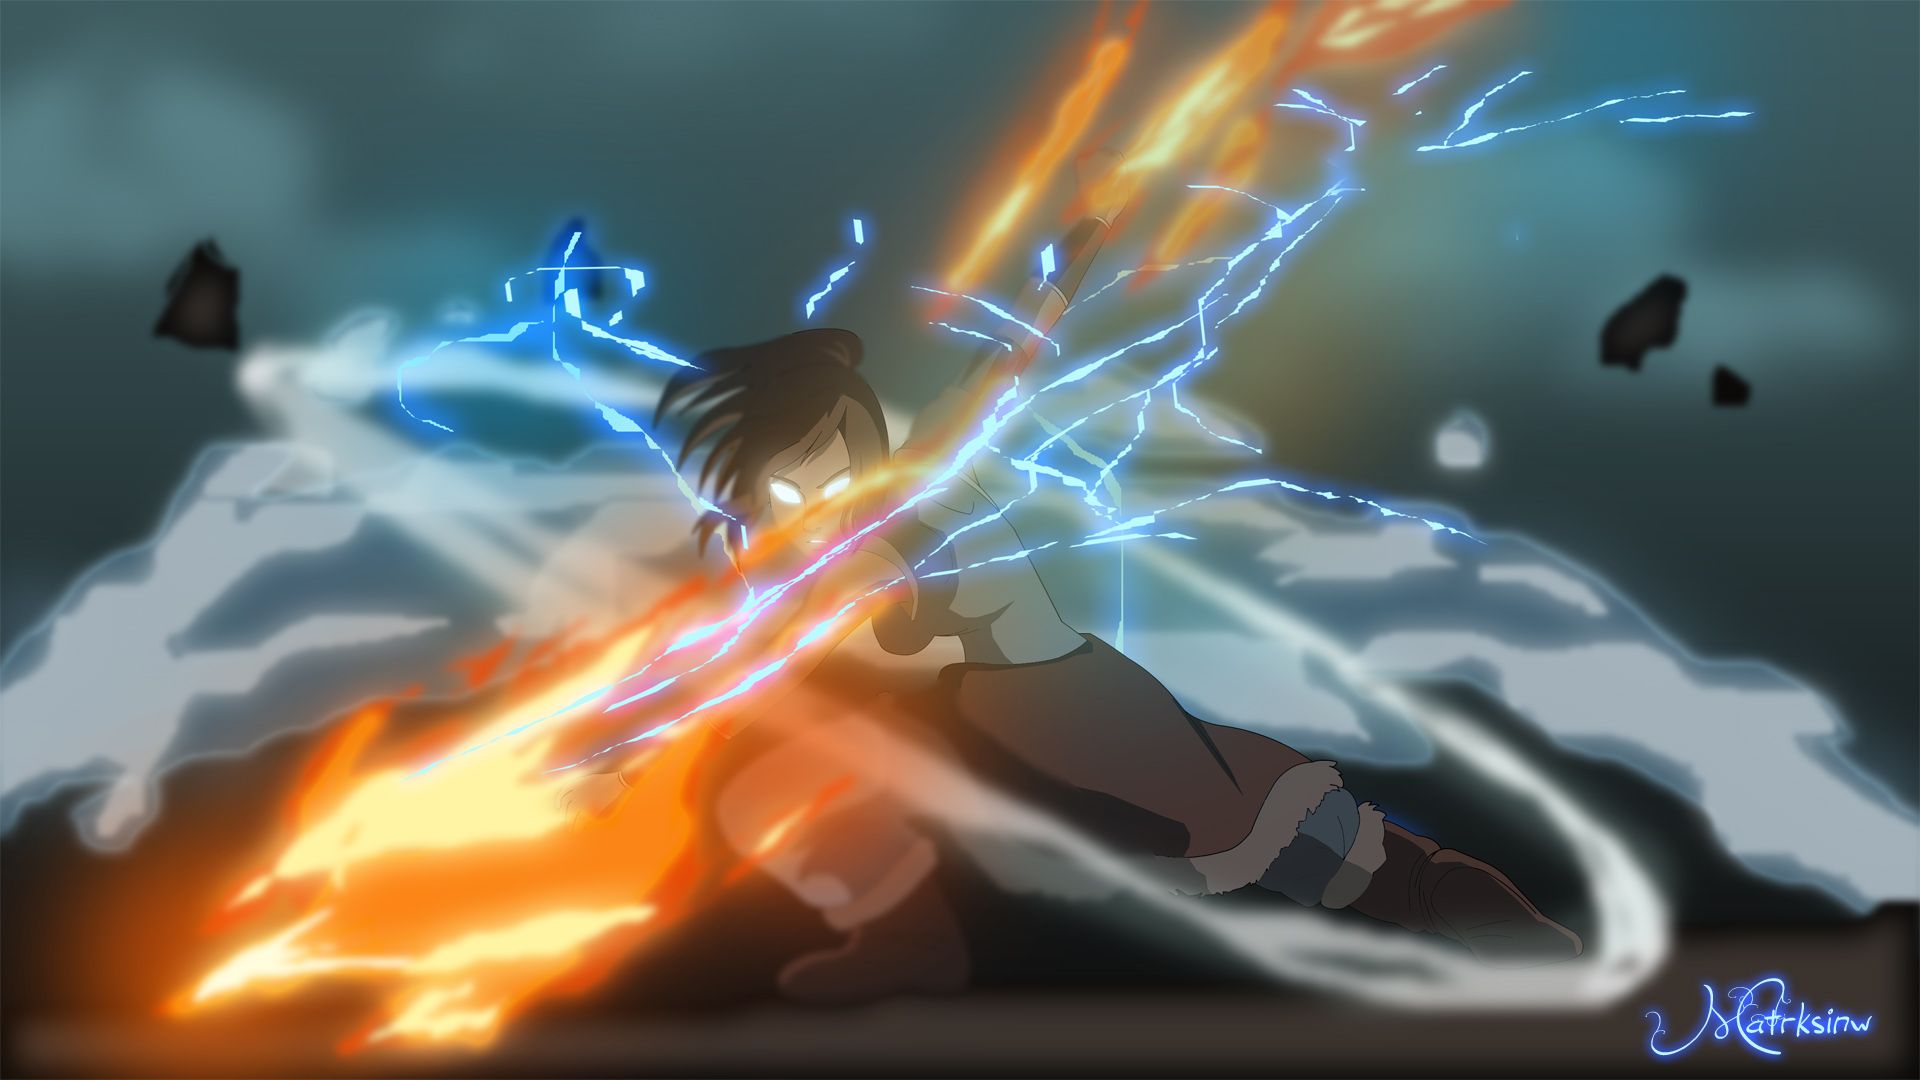 Free download avatar state Avatar The Legend of Korra Photo 36316565 [1920x1080] for your Desktop, Mobile & Tablet. Explore Avatar State Wallpaper. Avatar The Last Airbender Wallpaper, Avatar Wallpaper